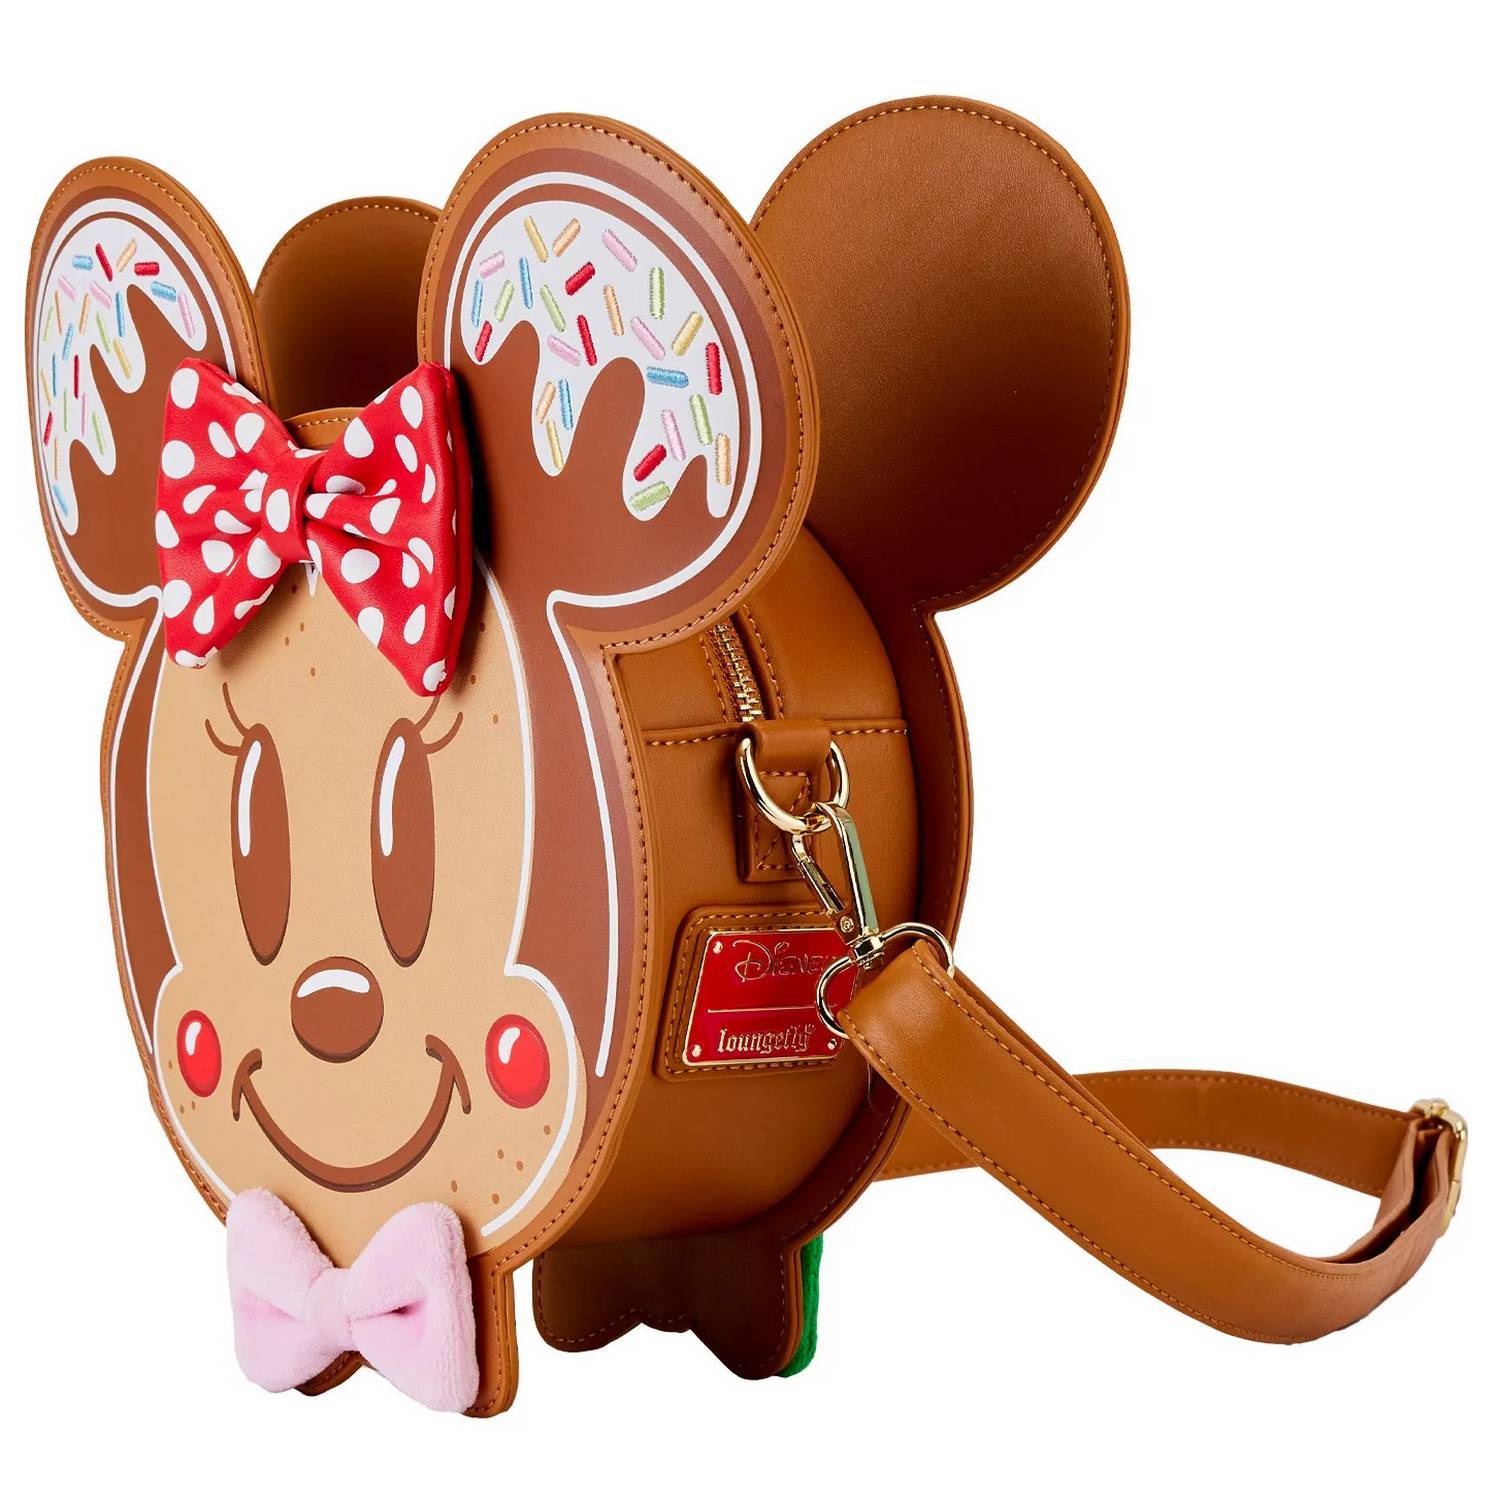 Mickey & Minnie Gingerbread Cookie